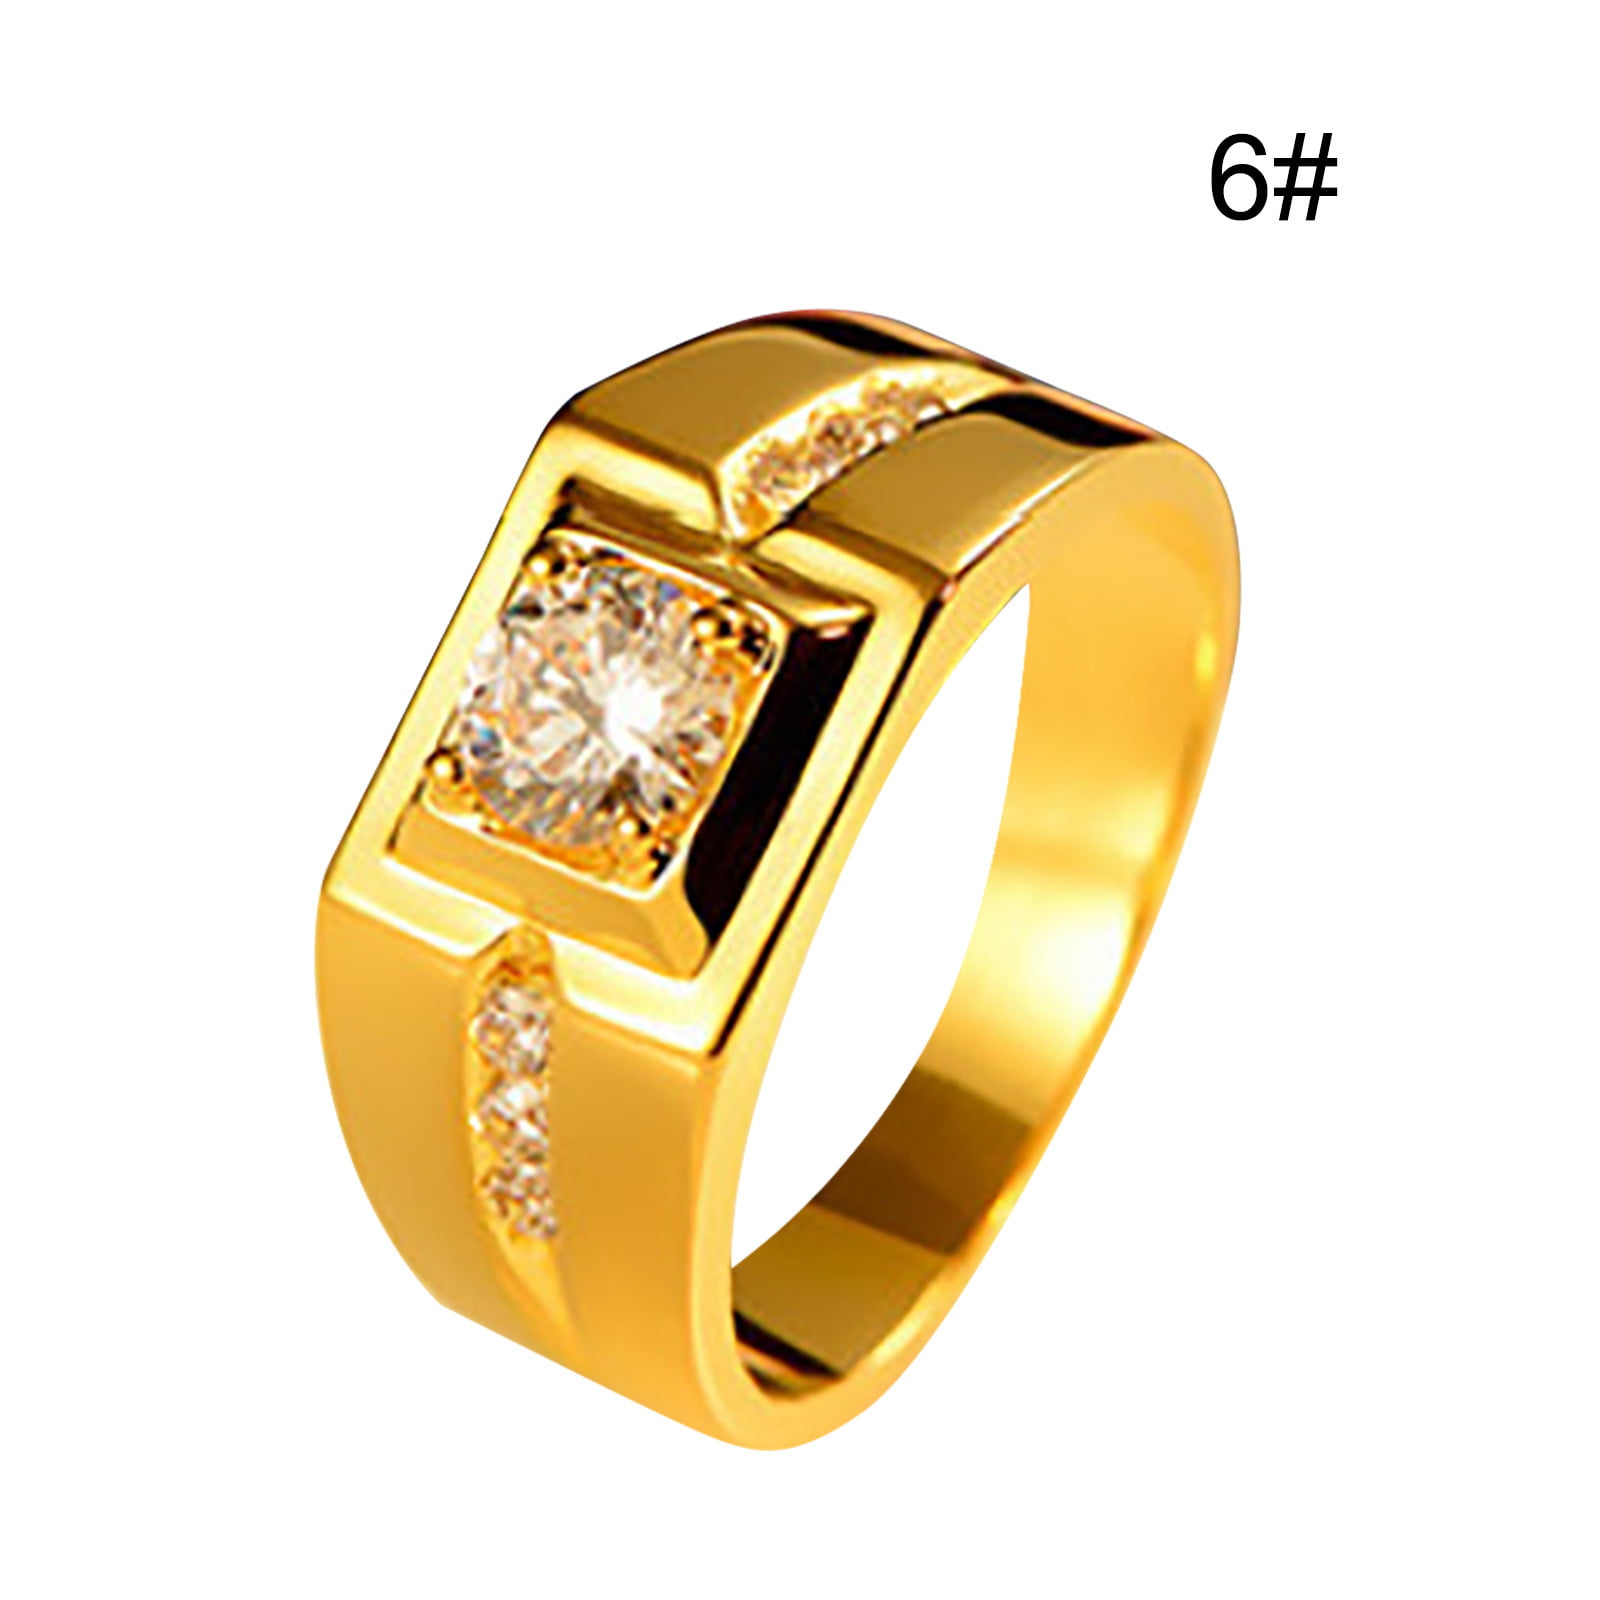 Exclusive Heavy Solitaire Stone Ring 22k Yellow gold Men's Gold Ring CZ  stone 62 | eBay